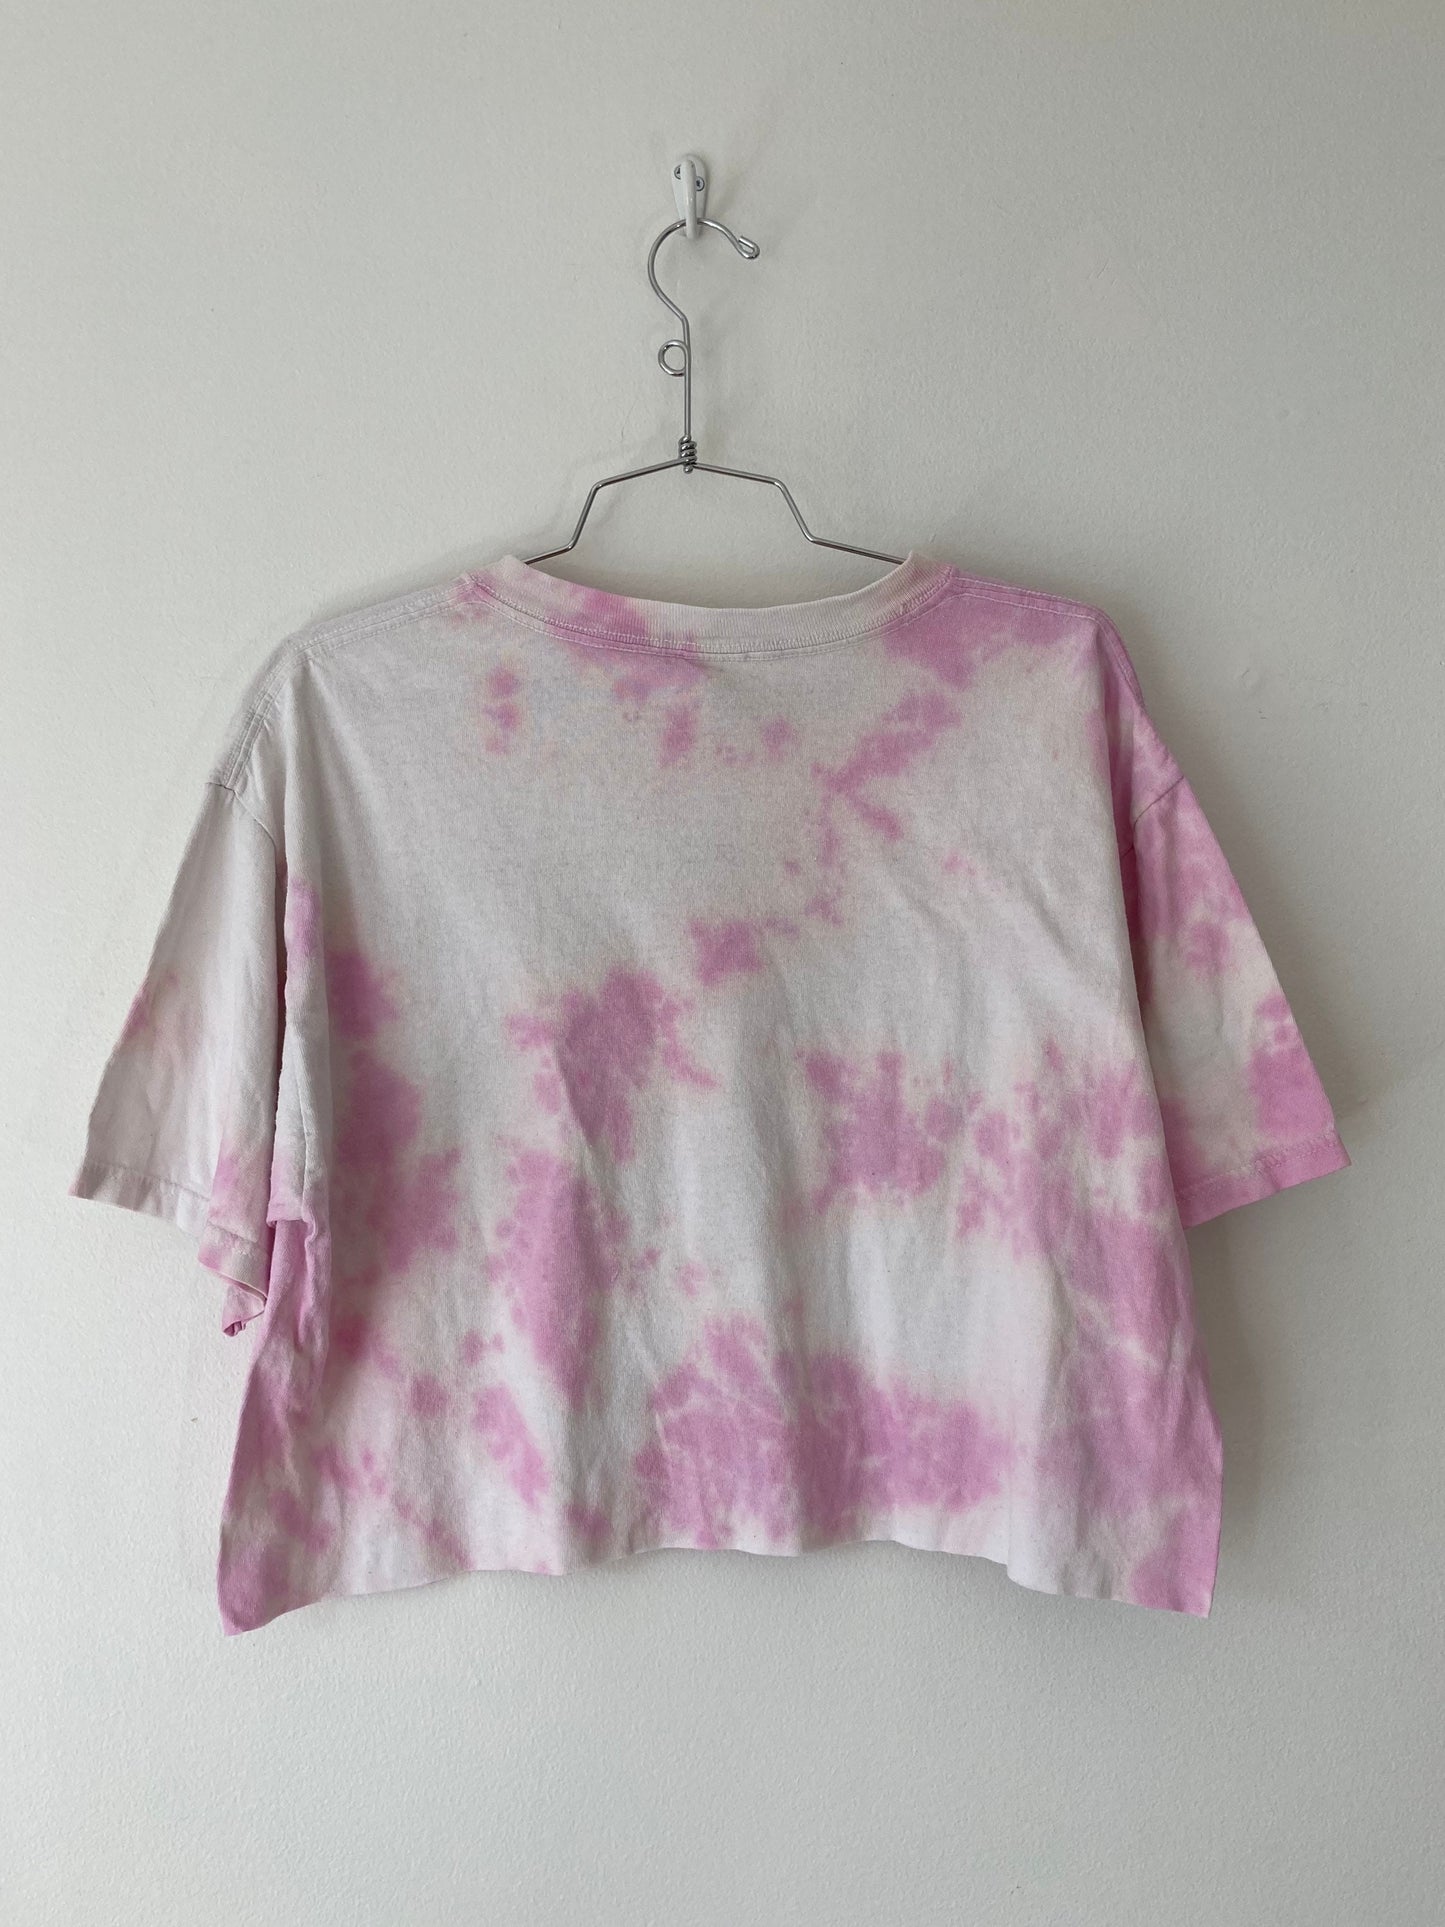 Hanes Tie Dye T shit // 90s Paper Thin Cropped Tee // Large